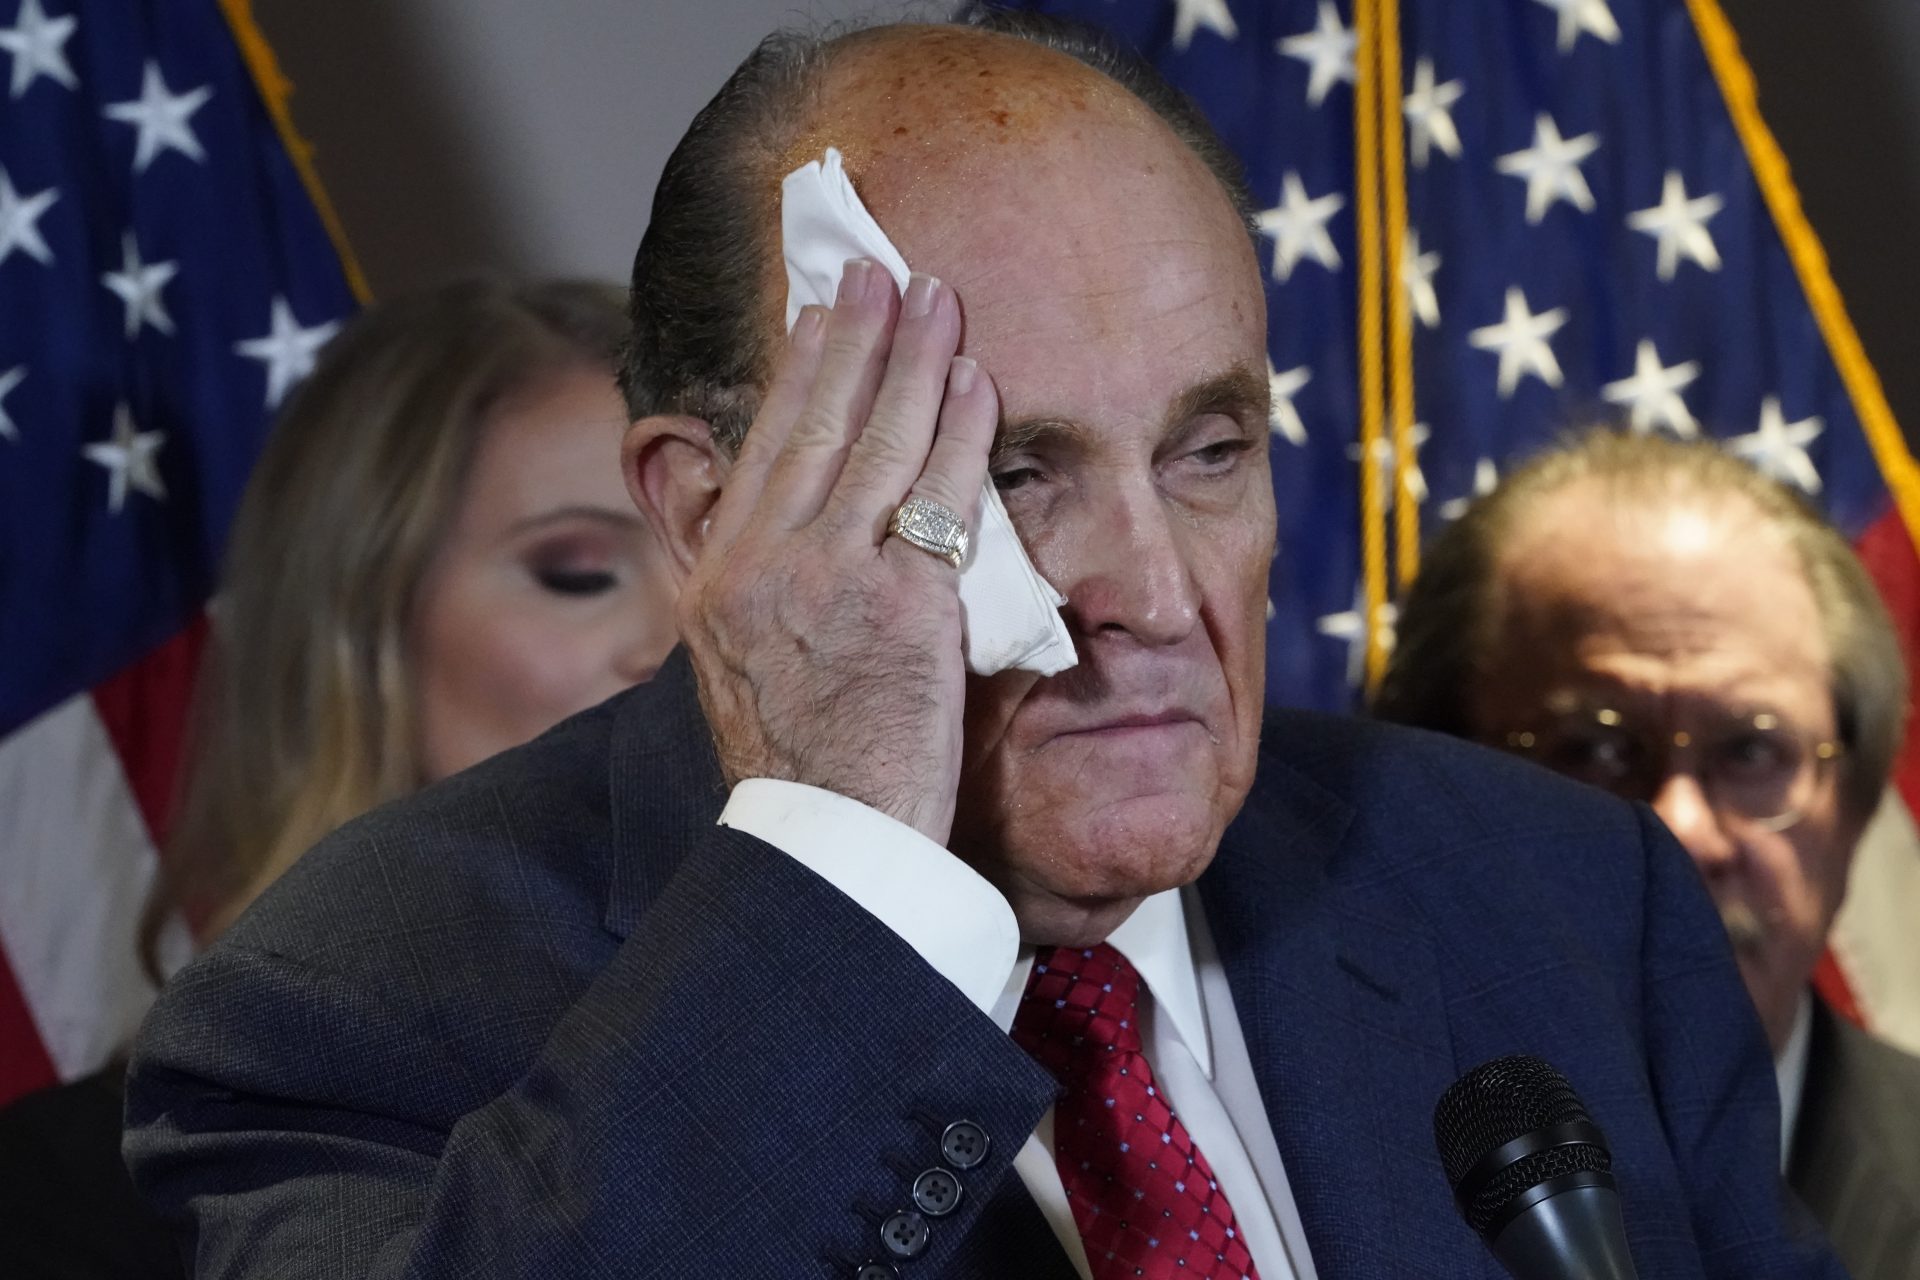 Former Mayor of New York Rudy Giuliani, a lawyer for President Donald Trump, speaks during a news conference at the Republican National Committee headquarters, Thursday Nov. 19, 2020, in Washington.